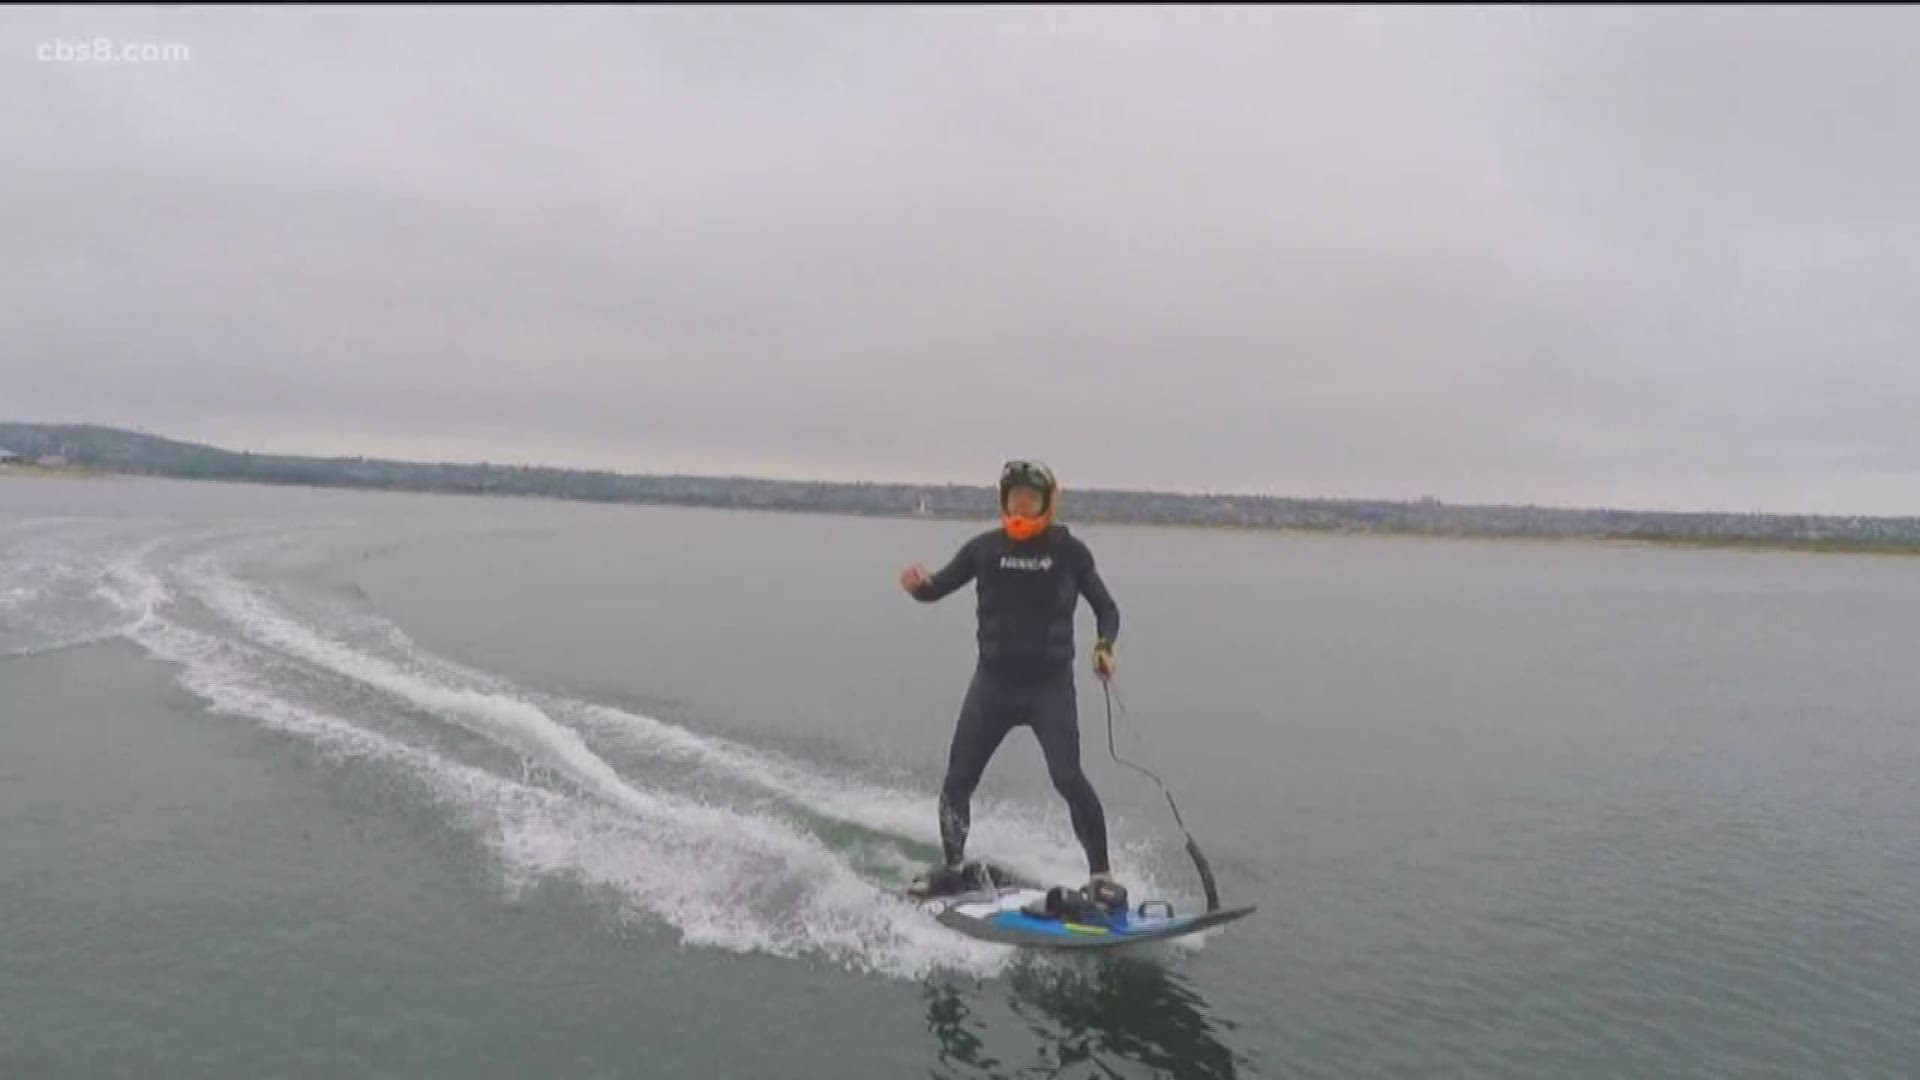 Who needs big waves when you can just hop on your surfboard and take-off. The company JetSurf is touring the county with its first ever fully electric board.